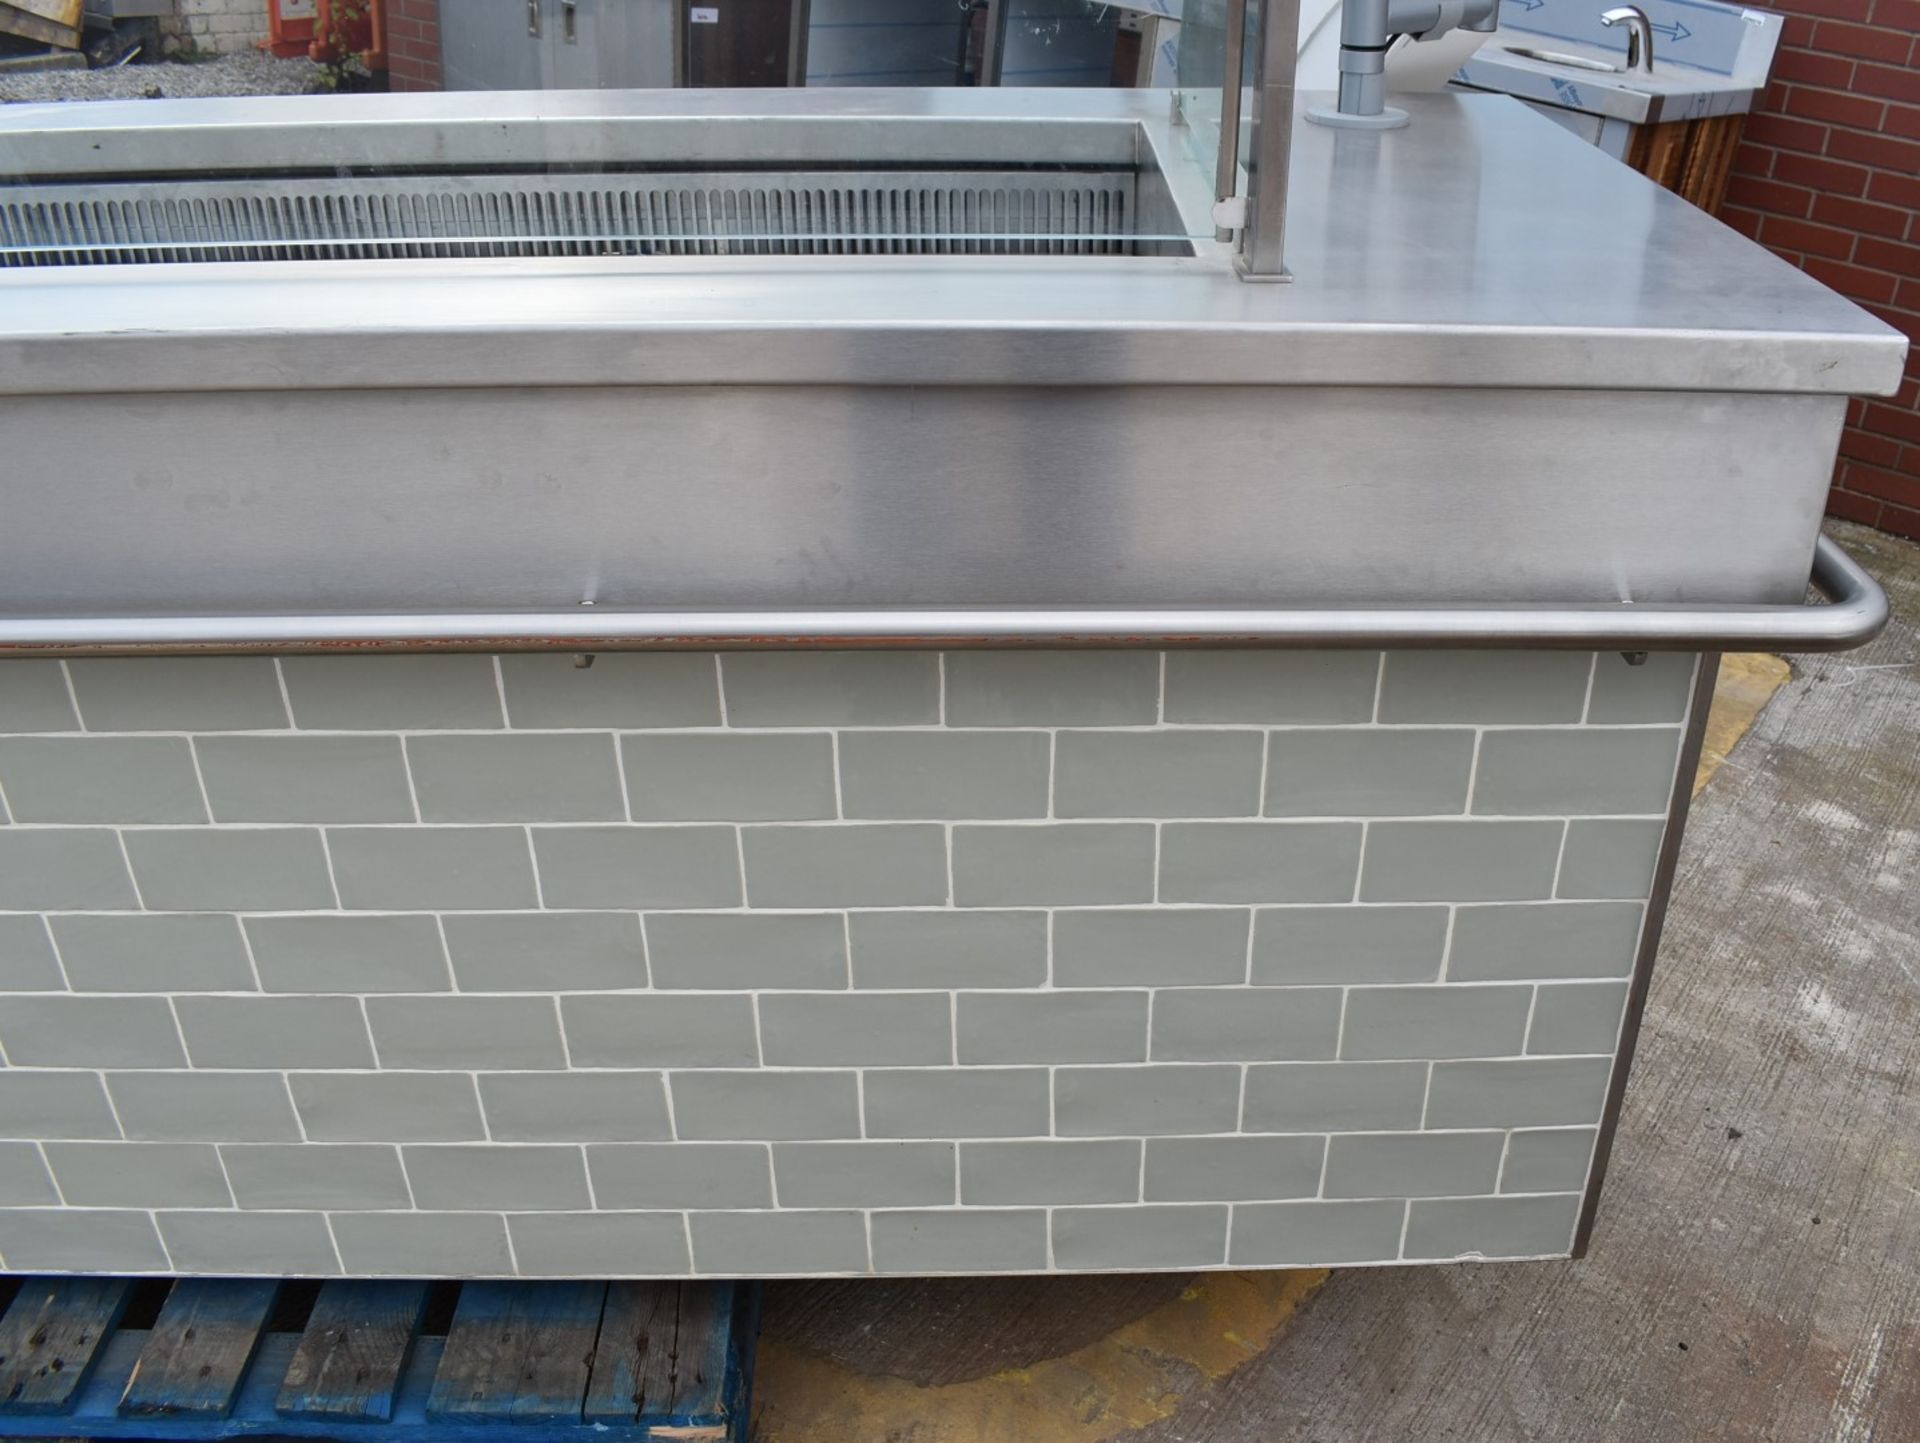 1 x Commercial Food Display Counter Featuring a Fan Blown Well, Glass Viewing Screen, Tiles Front - Image 50 of 60